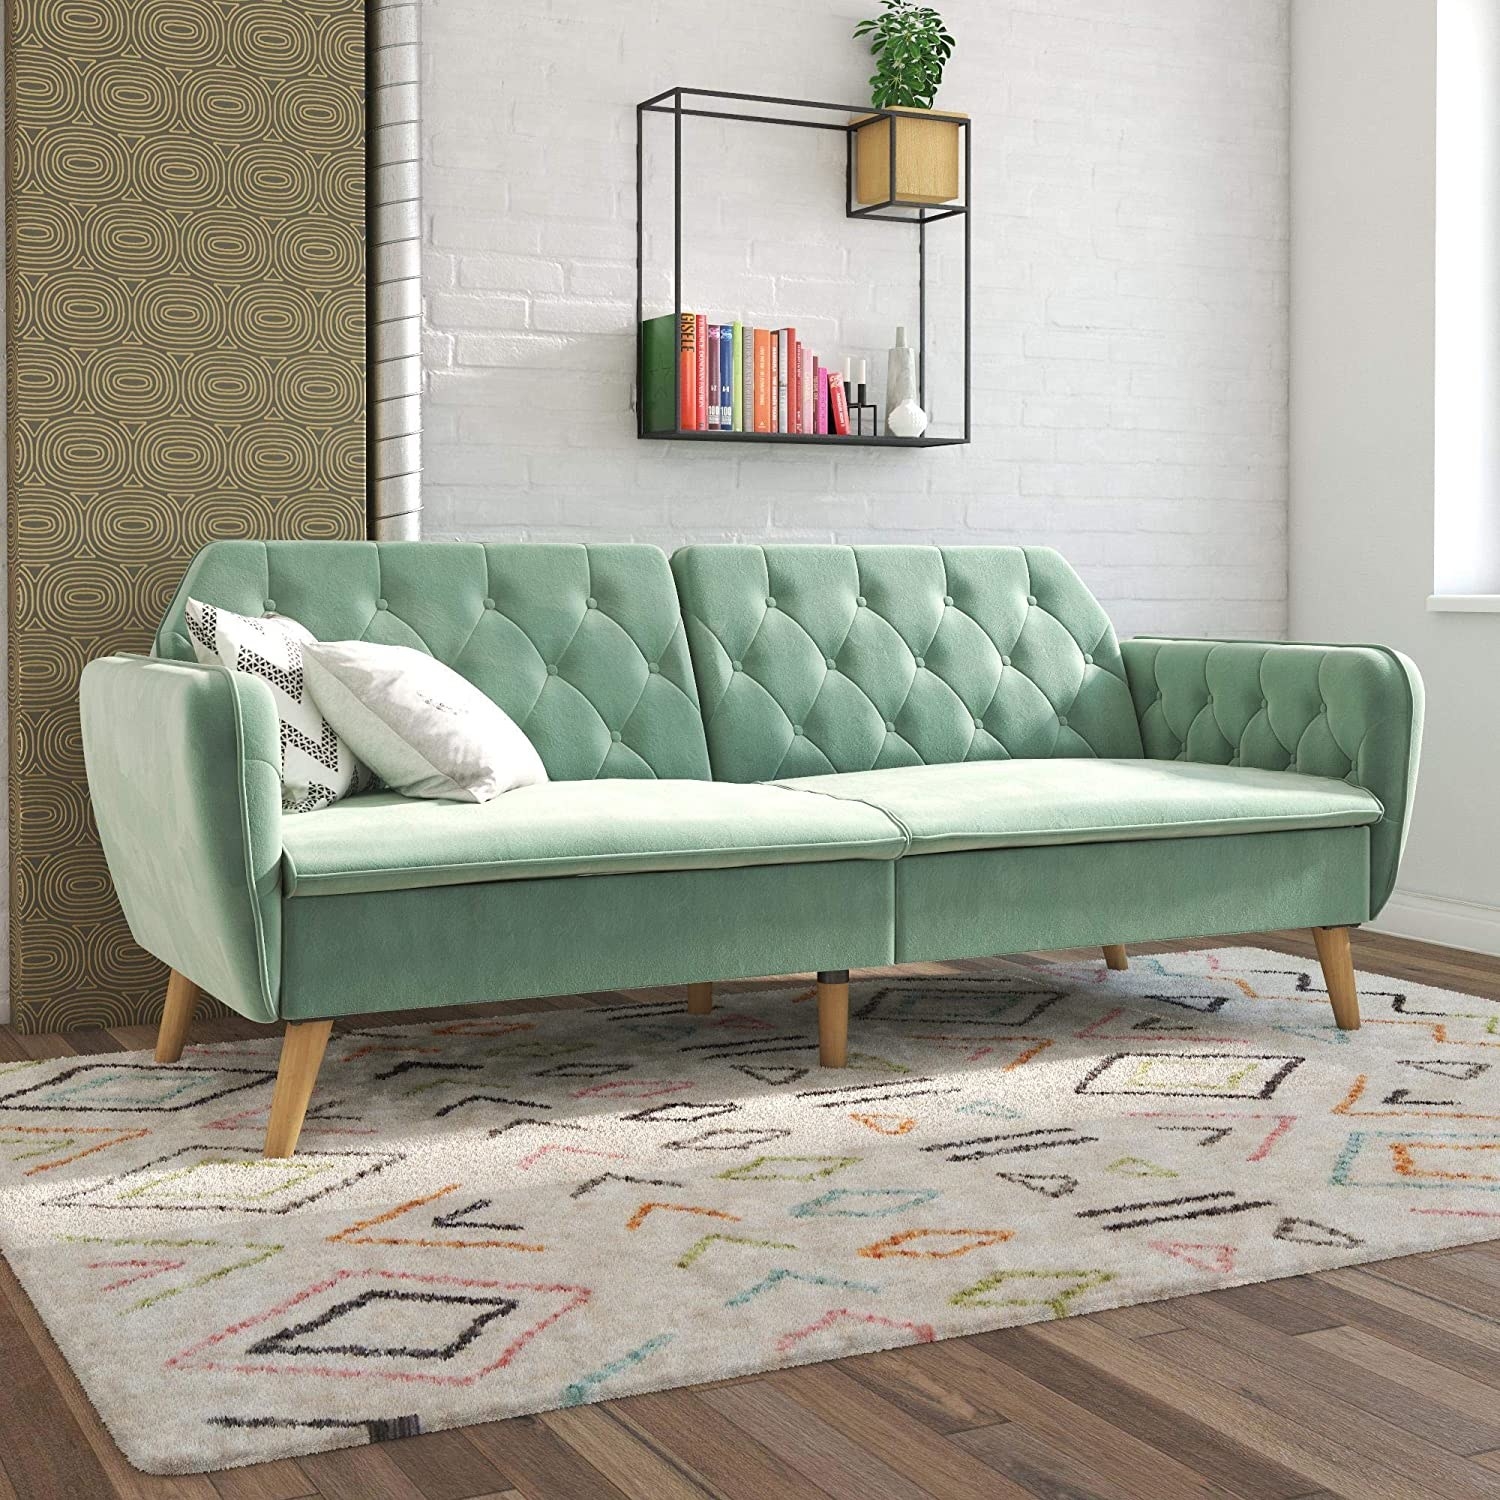 a mint velvet couch with a tufted back